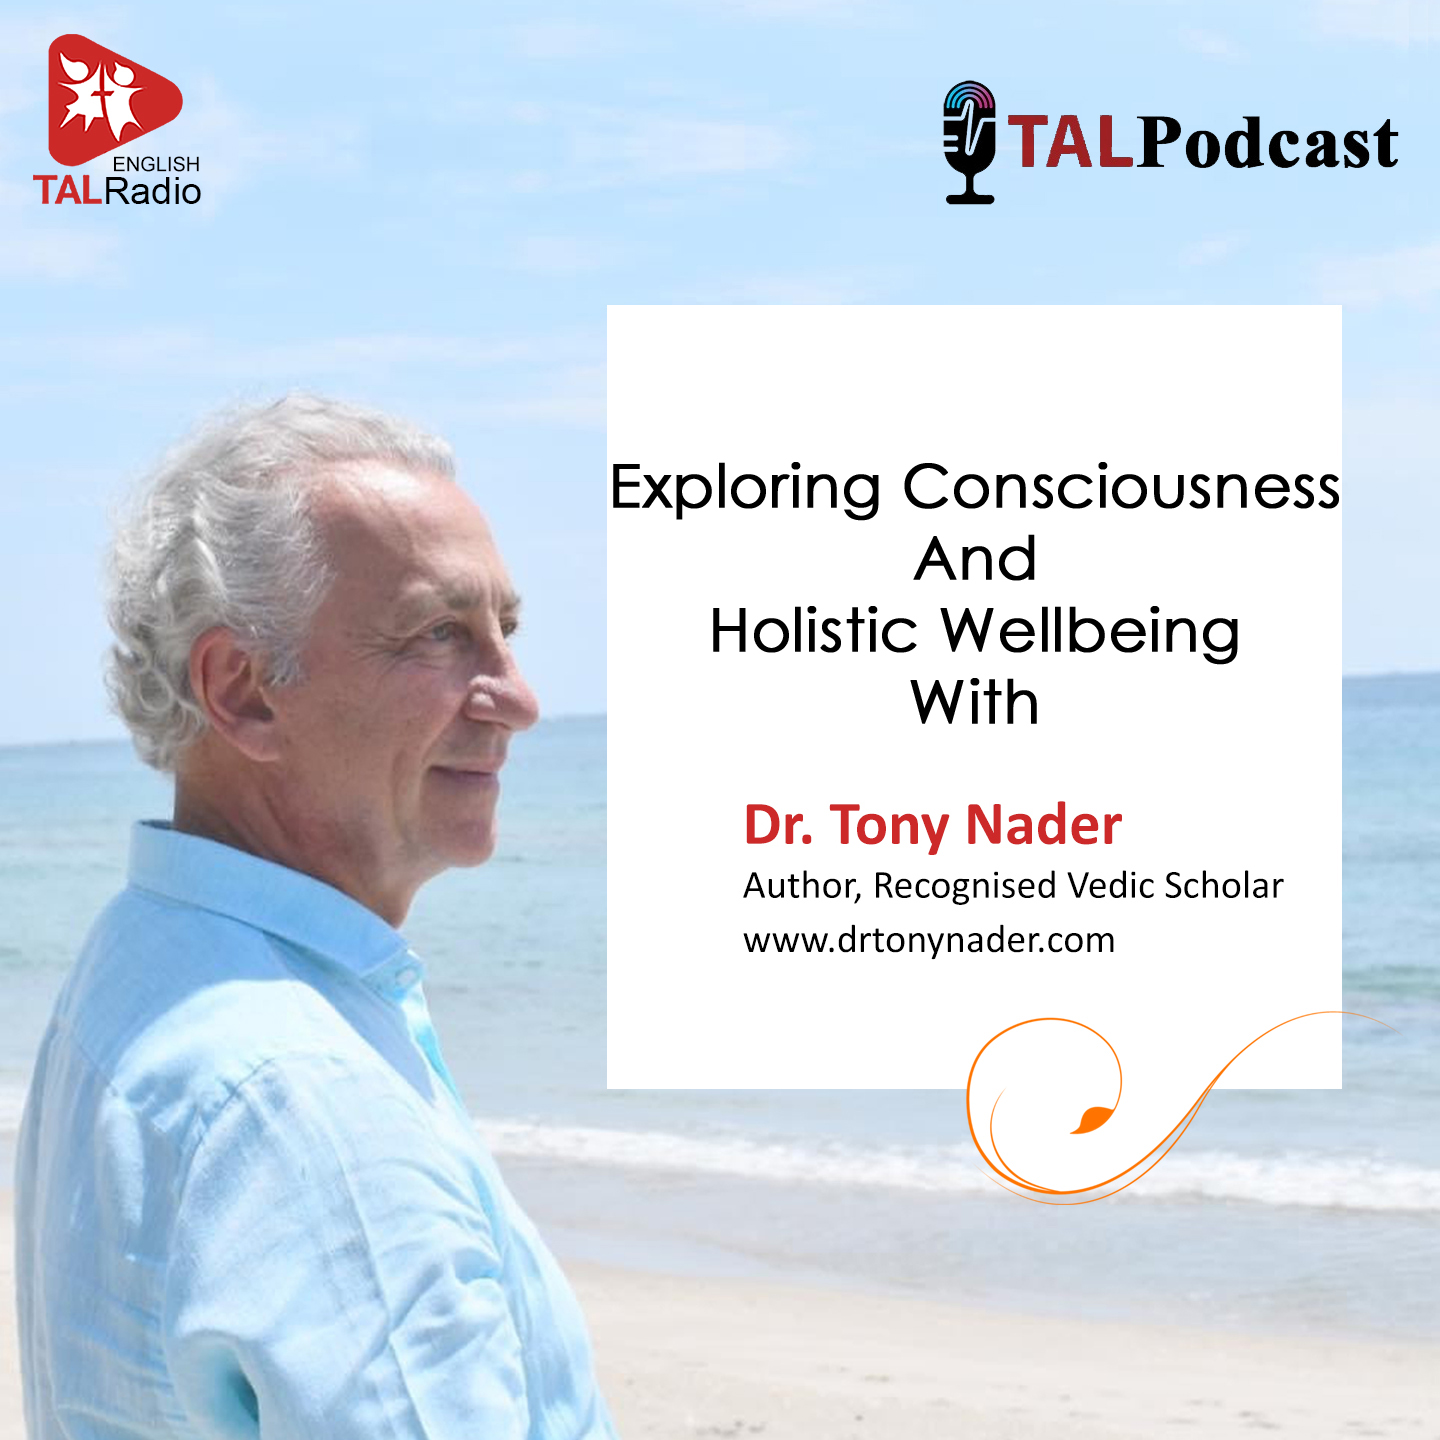 Exploring Consciousness and Holistic Wellbeing with Dr Tony Nader